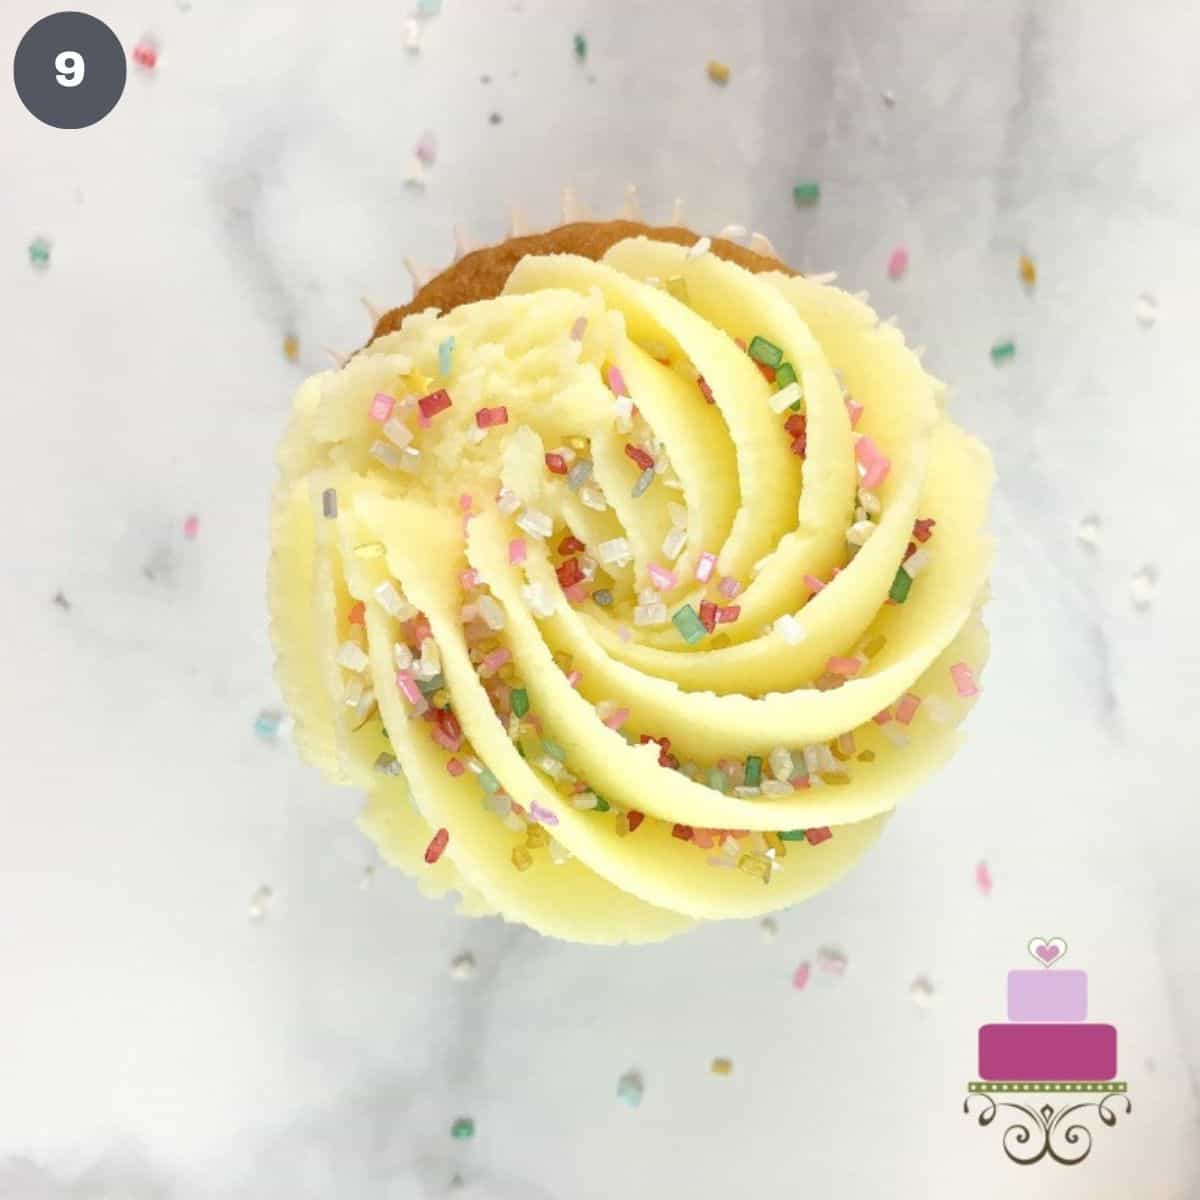 Cupcake topped with buttercream and sprinkles.